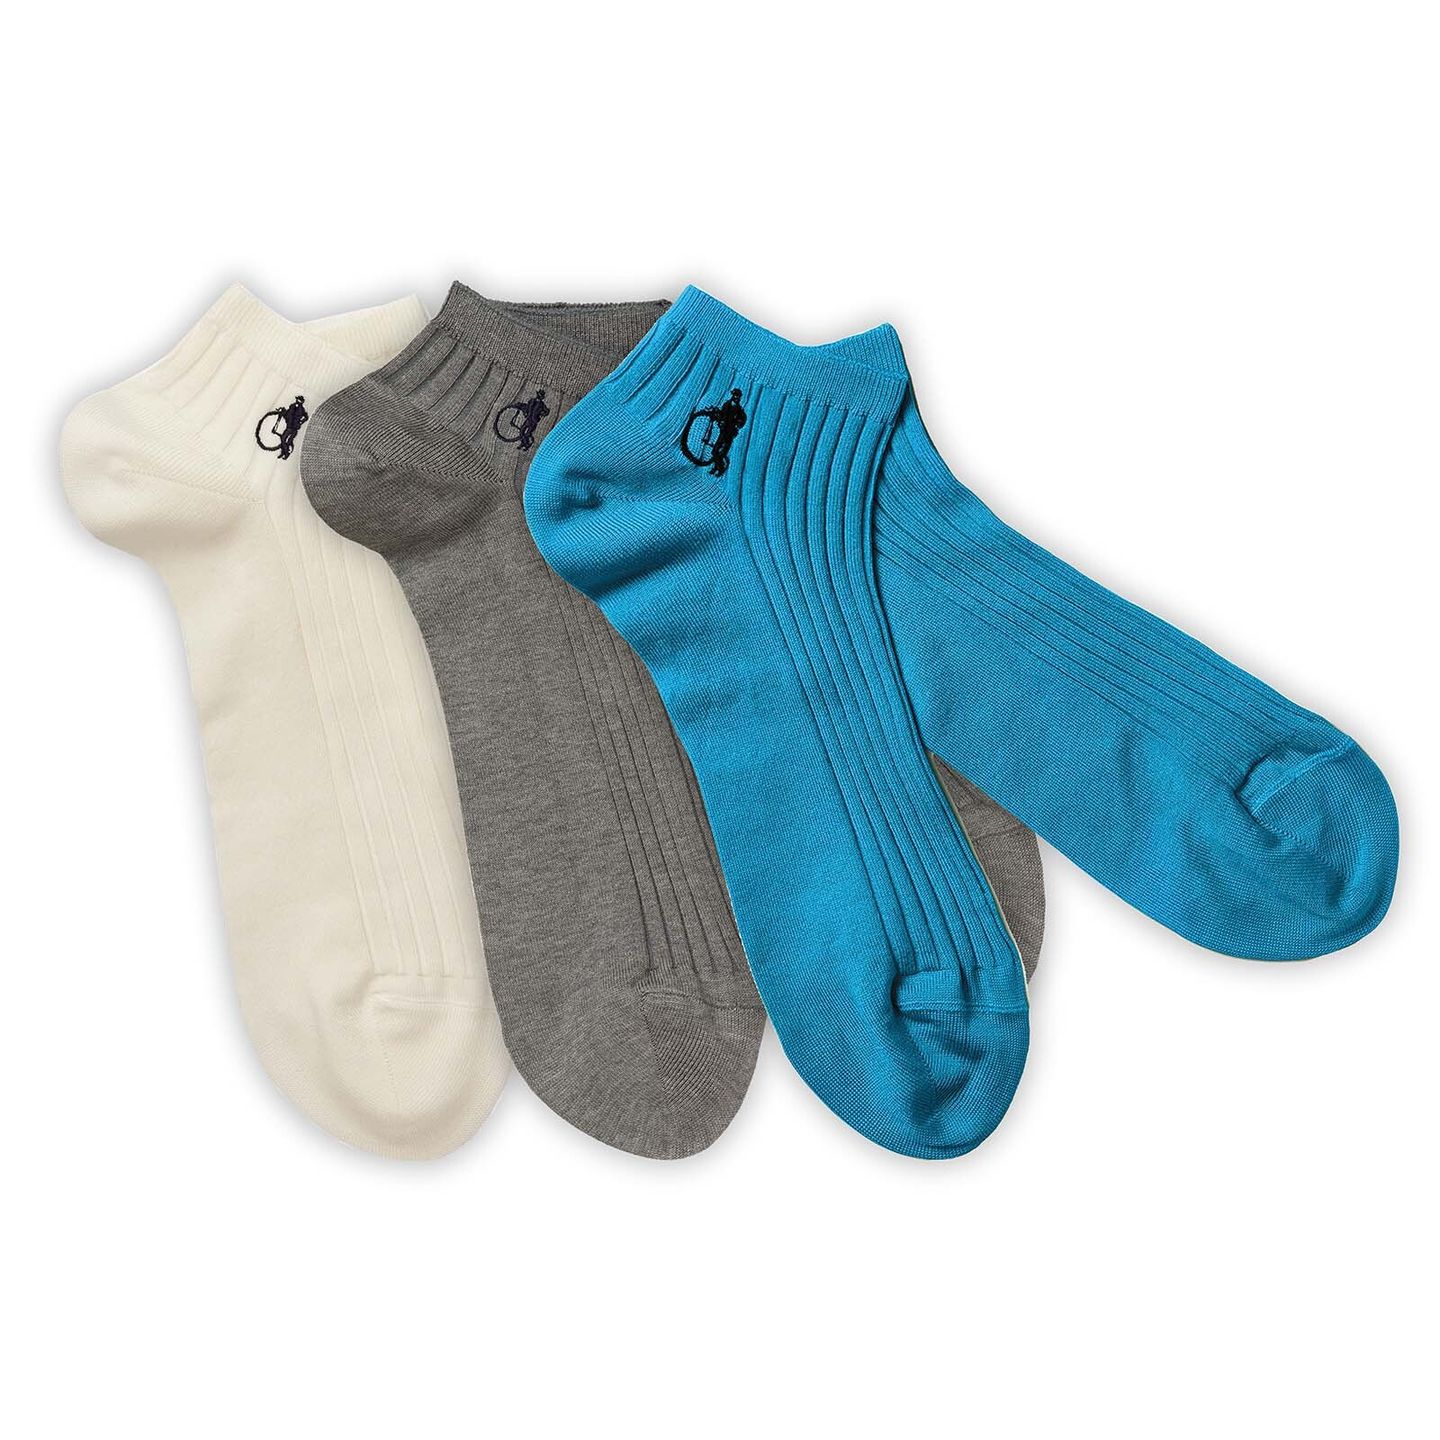 Simply Trainer Socks, Neutrals, 3 Pairs